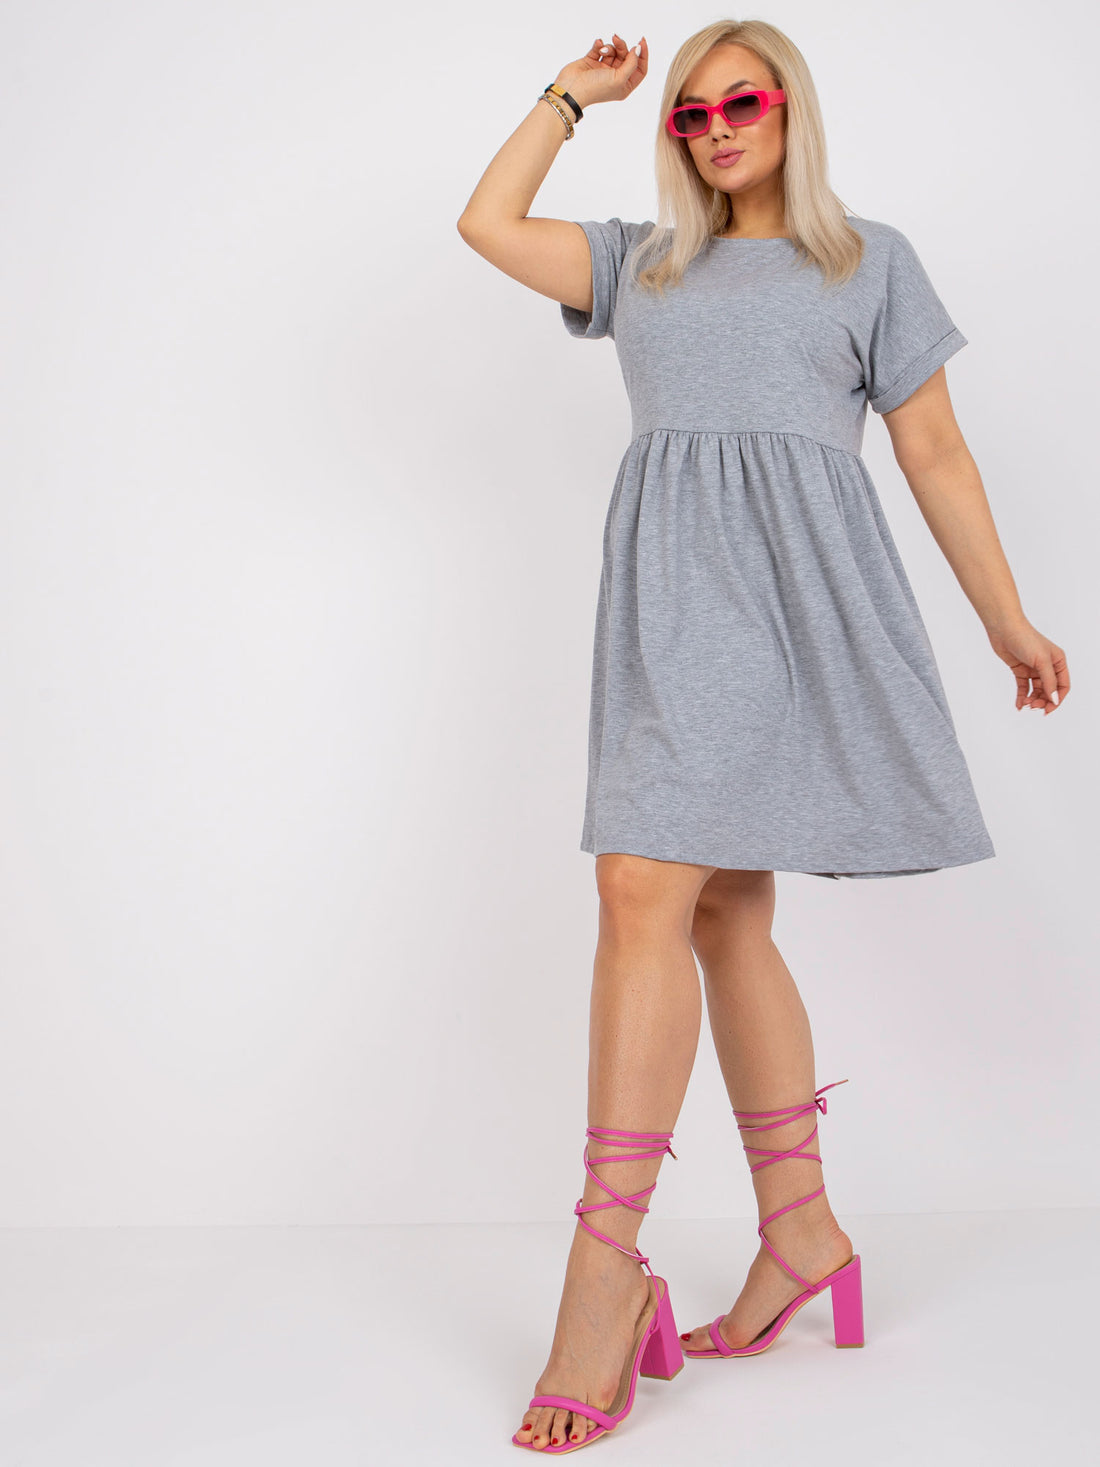 Grey plus size dress with short Molly sleeves.